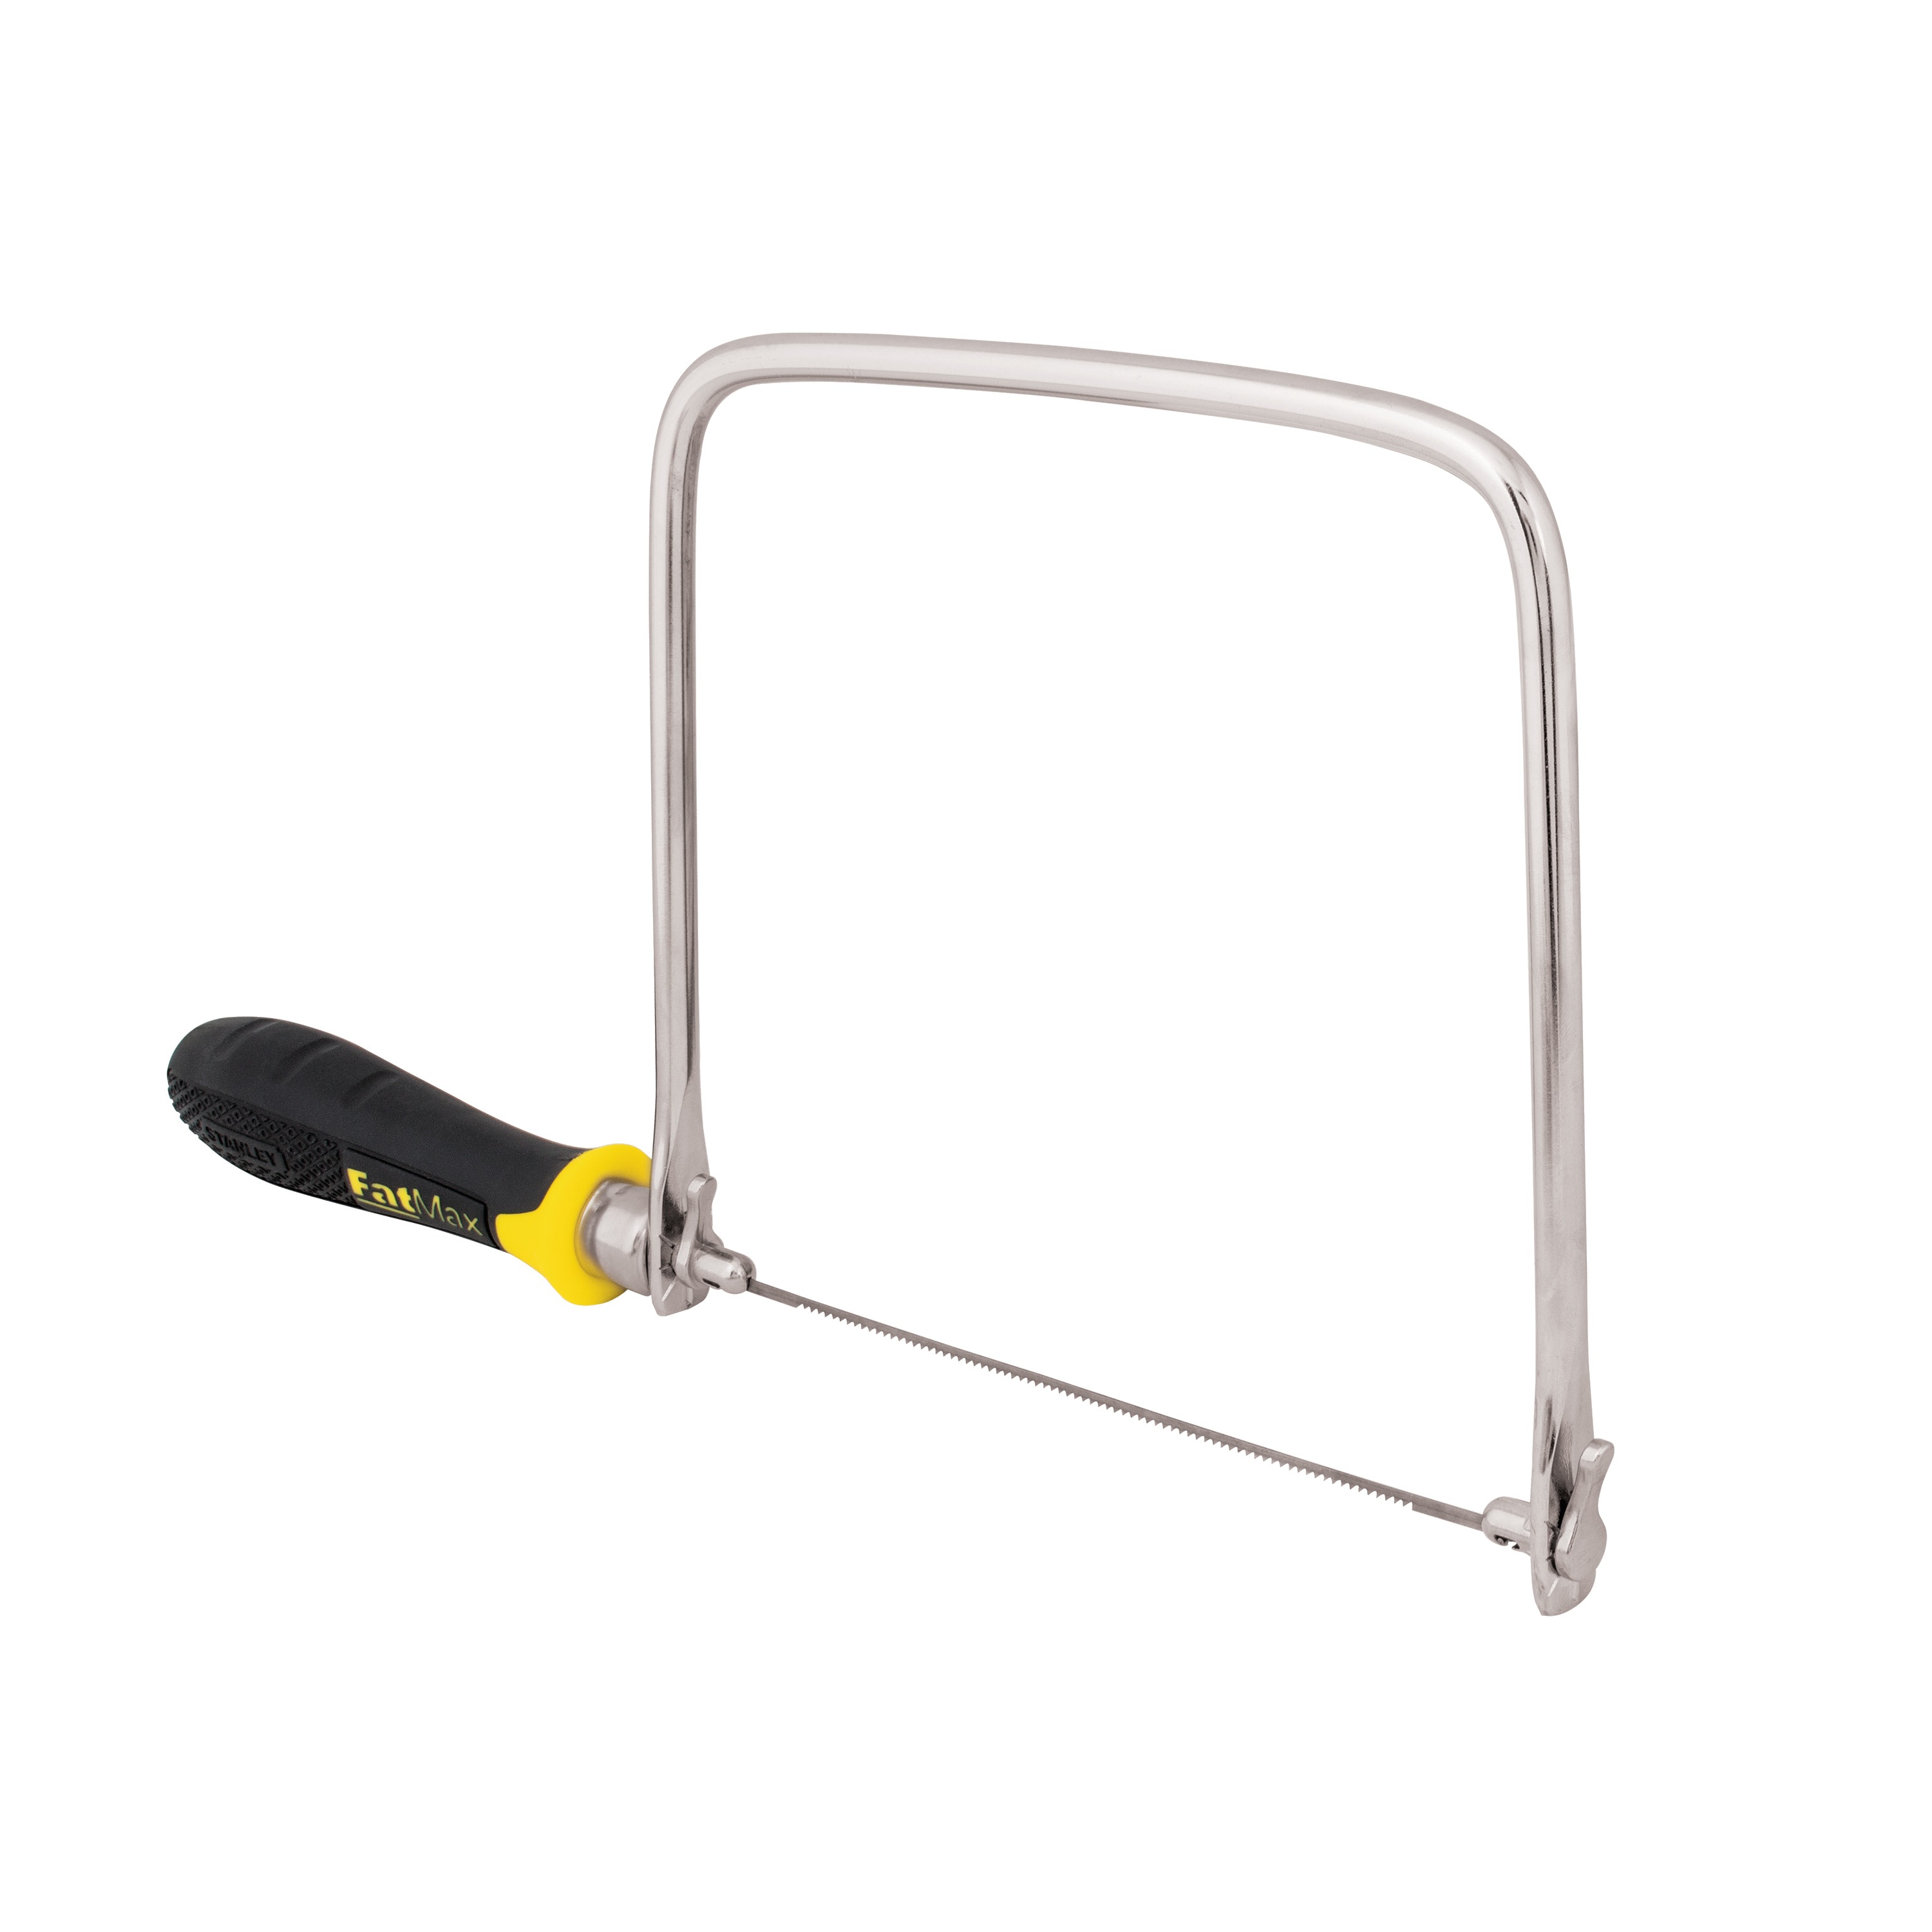 Stanley Tools - 634 in FATMAX Coping Saw - 15-106